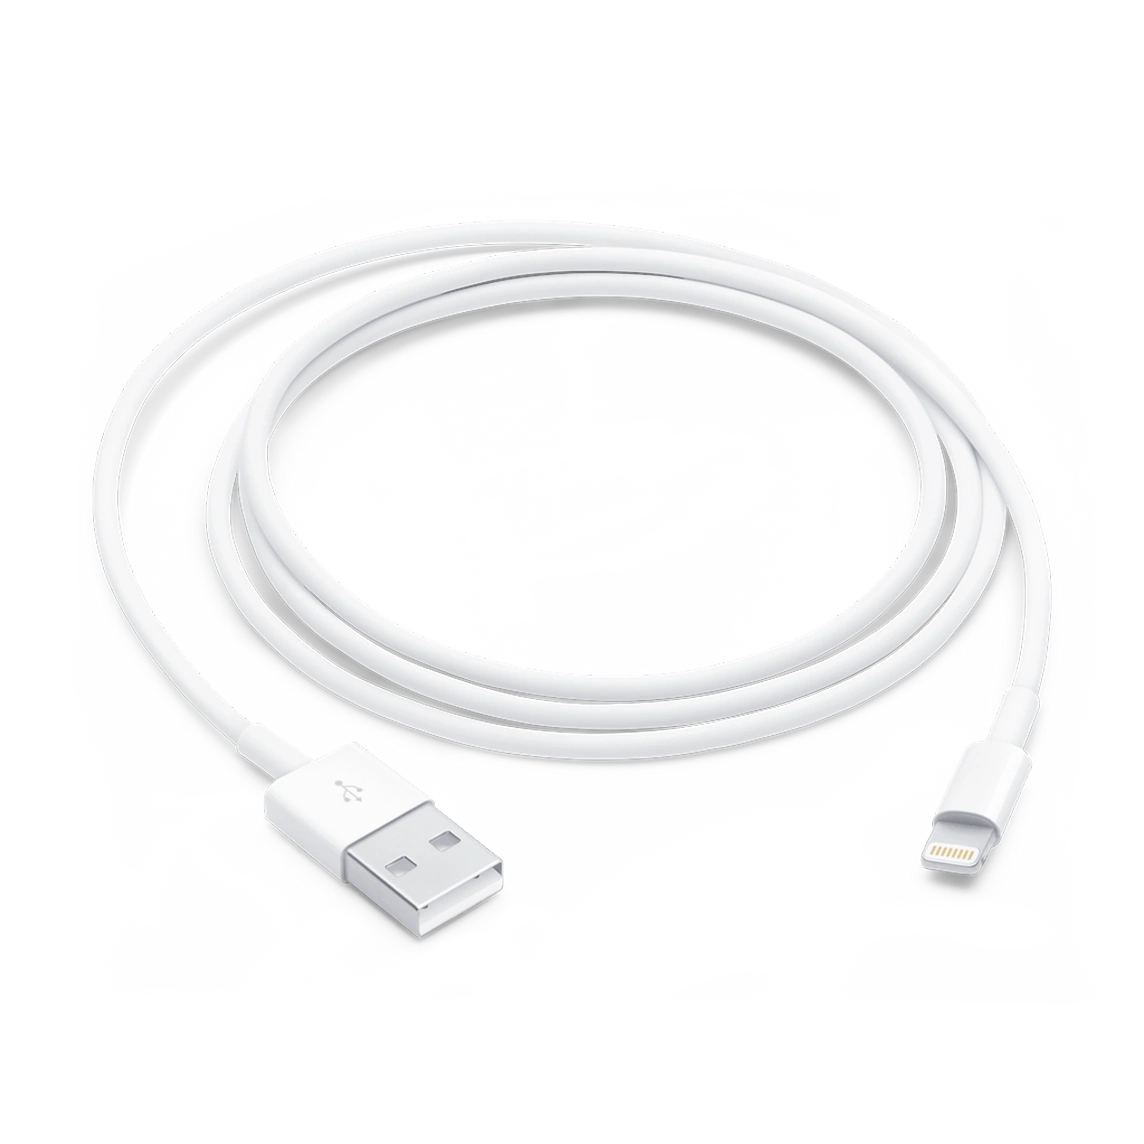 Apple USB to Lightning Cable 1m